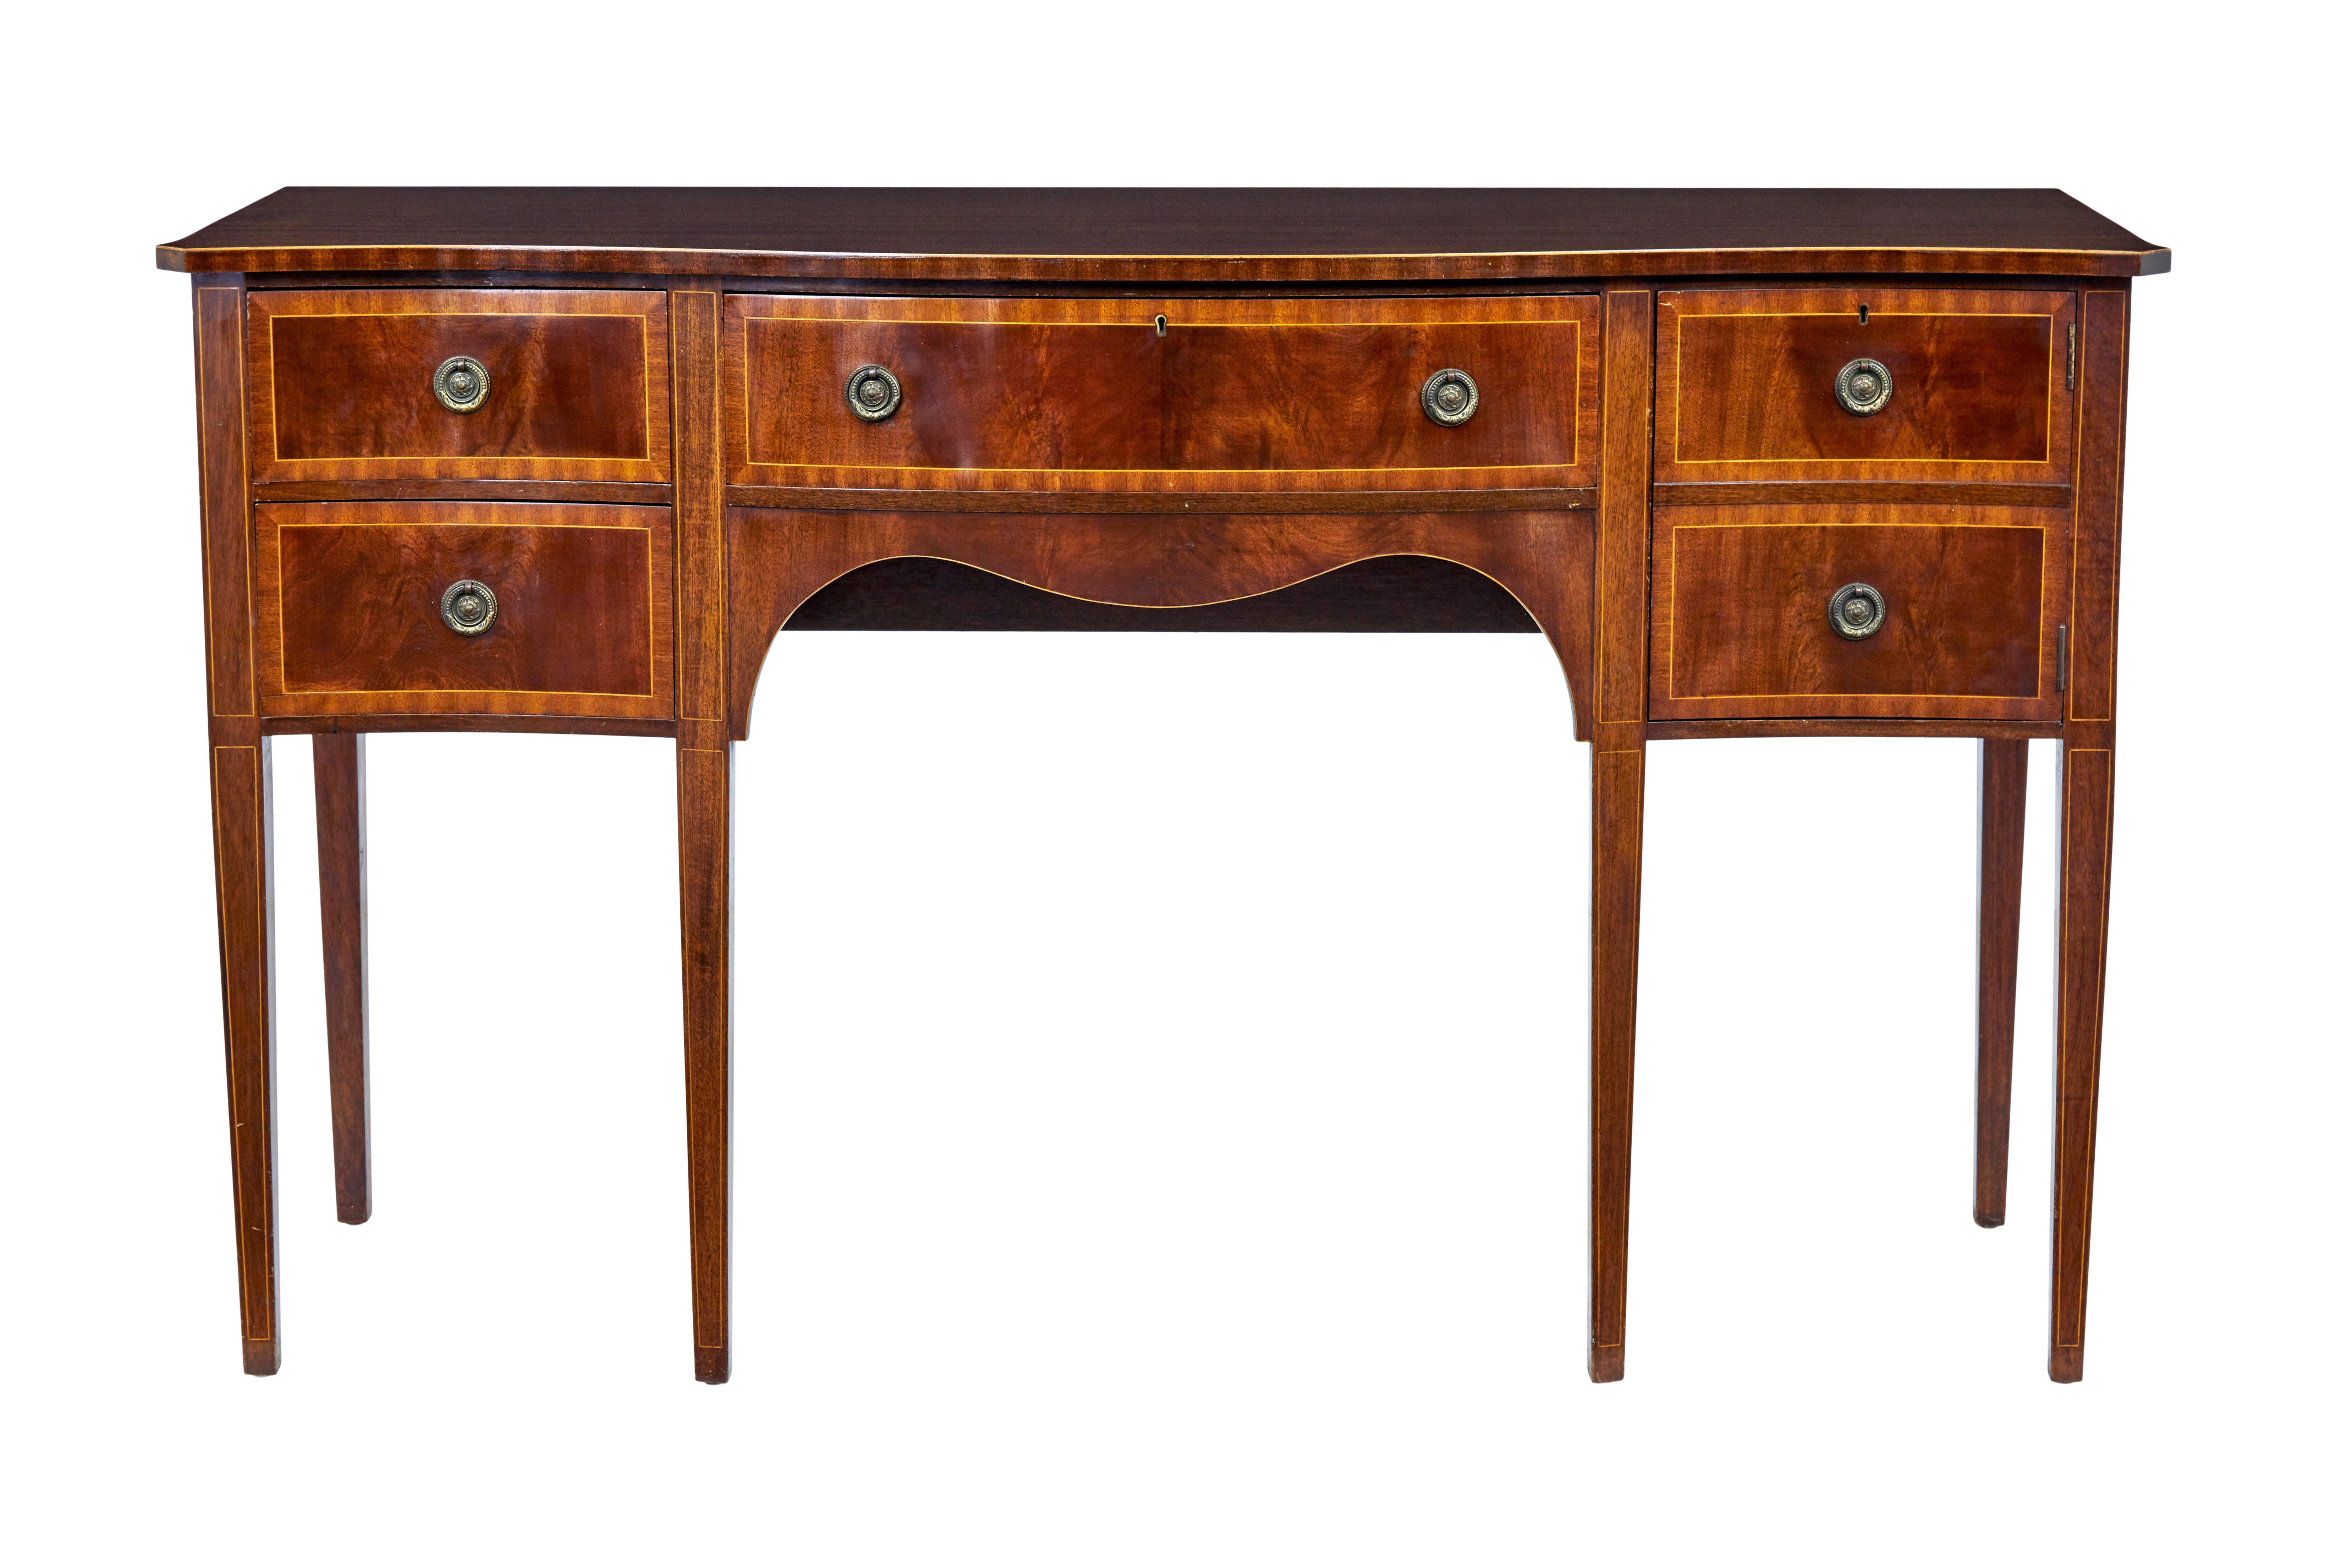 20th century Sheraton influenced mahogany sideboard circa 1970.

Good quality serpentine shaped sideboard/buffet made in the sheraton style.  Plain top surface with strung edge.  Central drawer flanked with 2 drawers to the left and a concealed